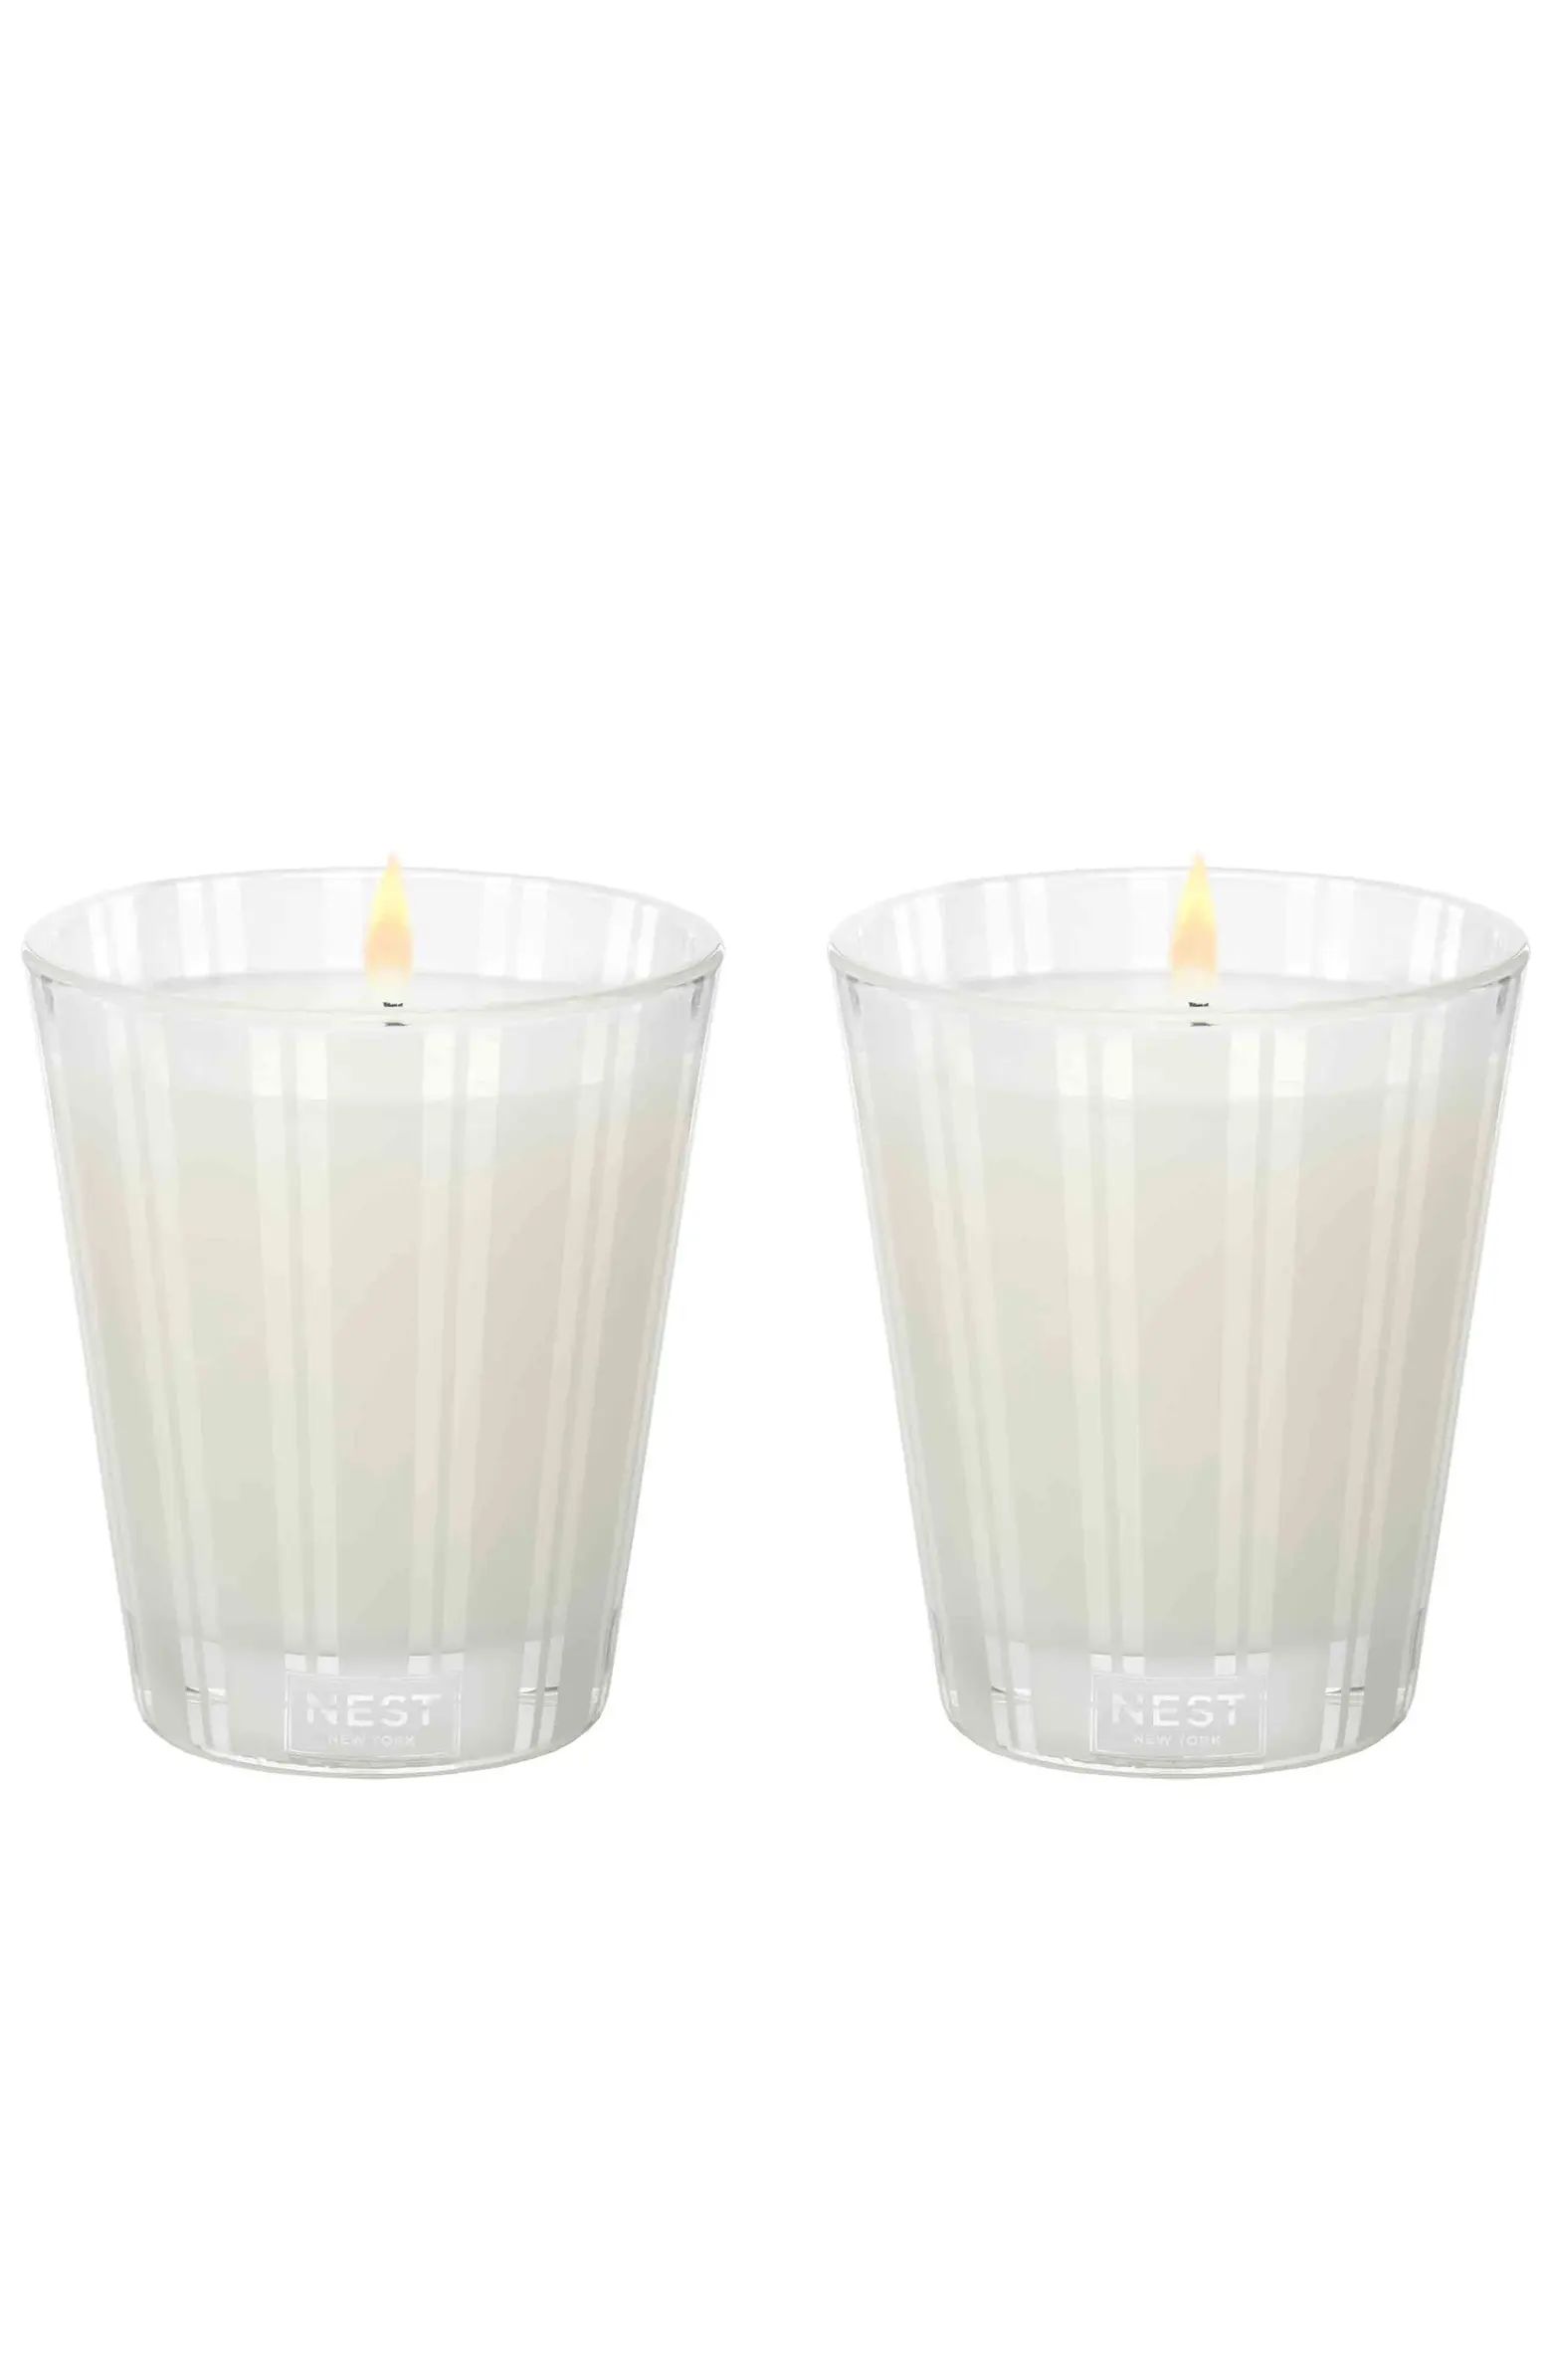 Grapefruit Candle Duo $92 ValueNEST NEW YORK | Nordstrom